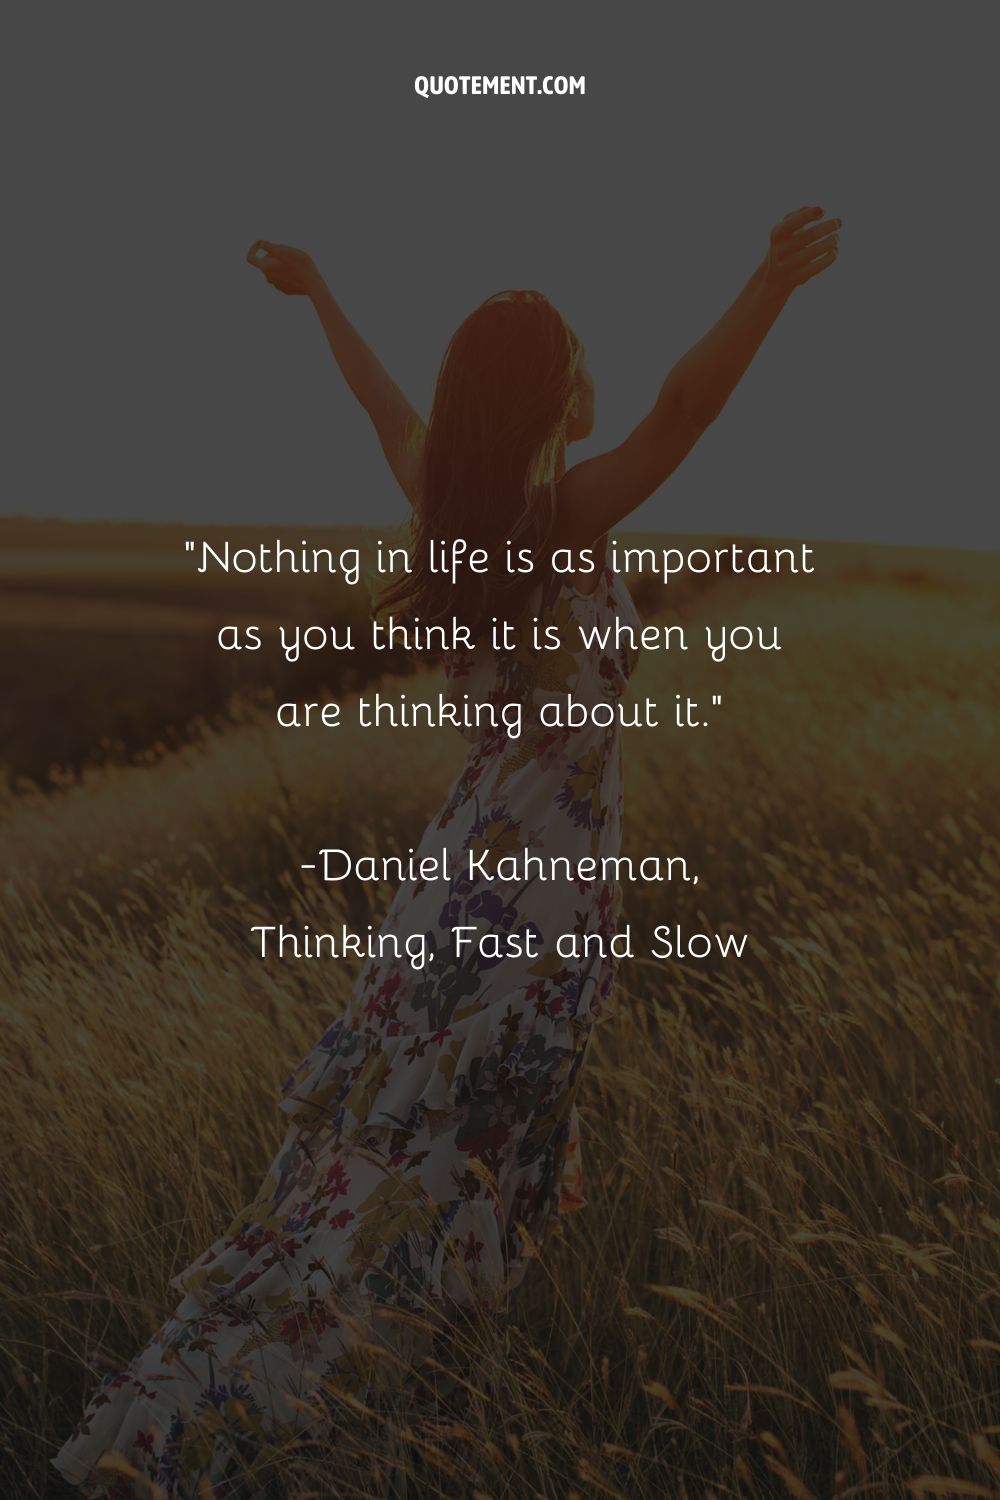 Nothing in life is as important as you think it is when you are thinking about it